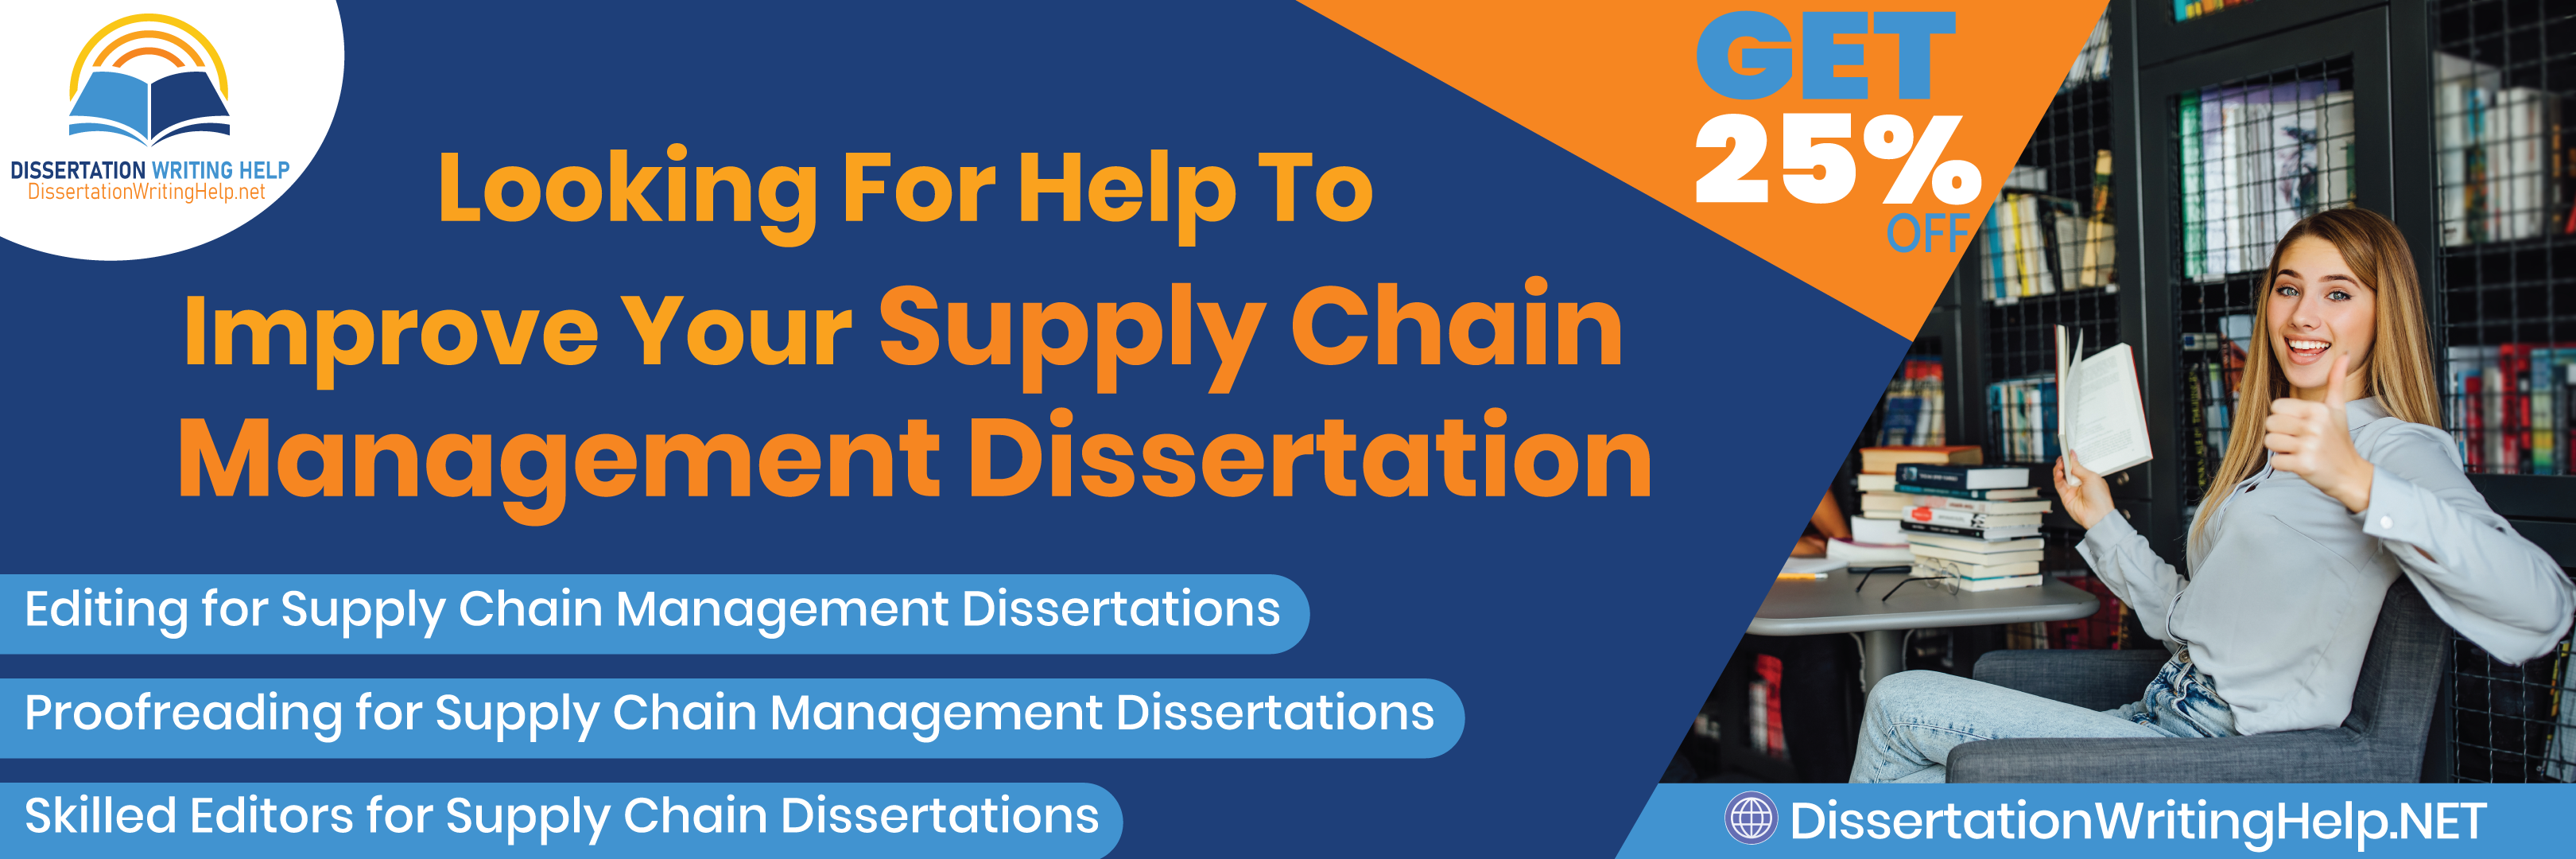 supply-chain-management-dissertation-editing-and-proofreading-service